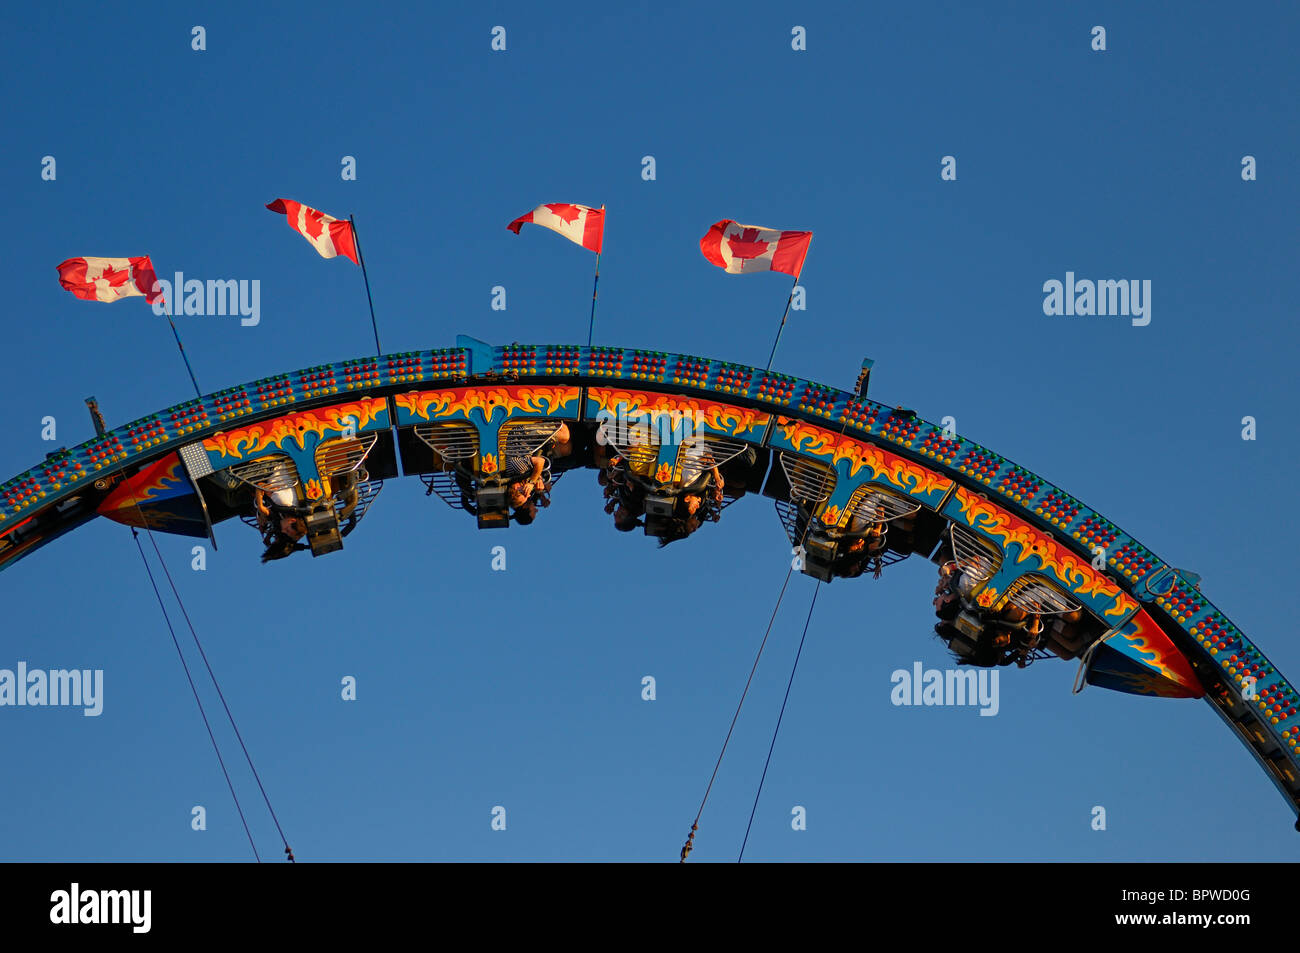 Riders hanging upside down on a roller coaster ride at the Canadian National Exhibition CNE funfair midway fairgrounds Toronto Canada flags Stock Photo